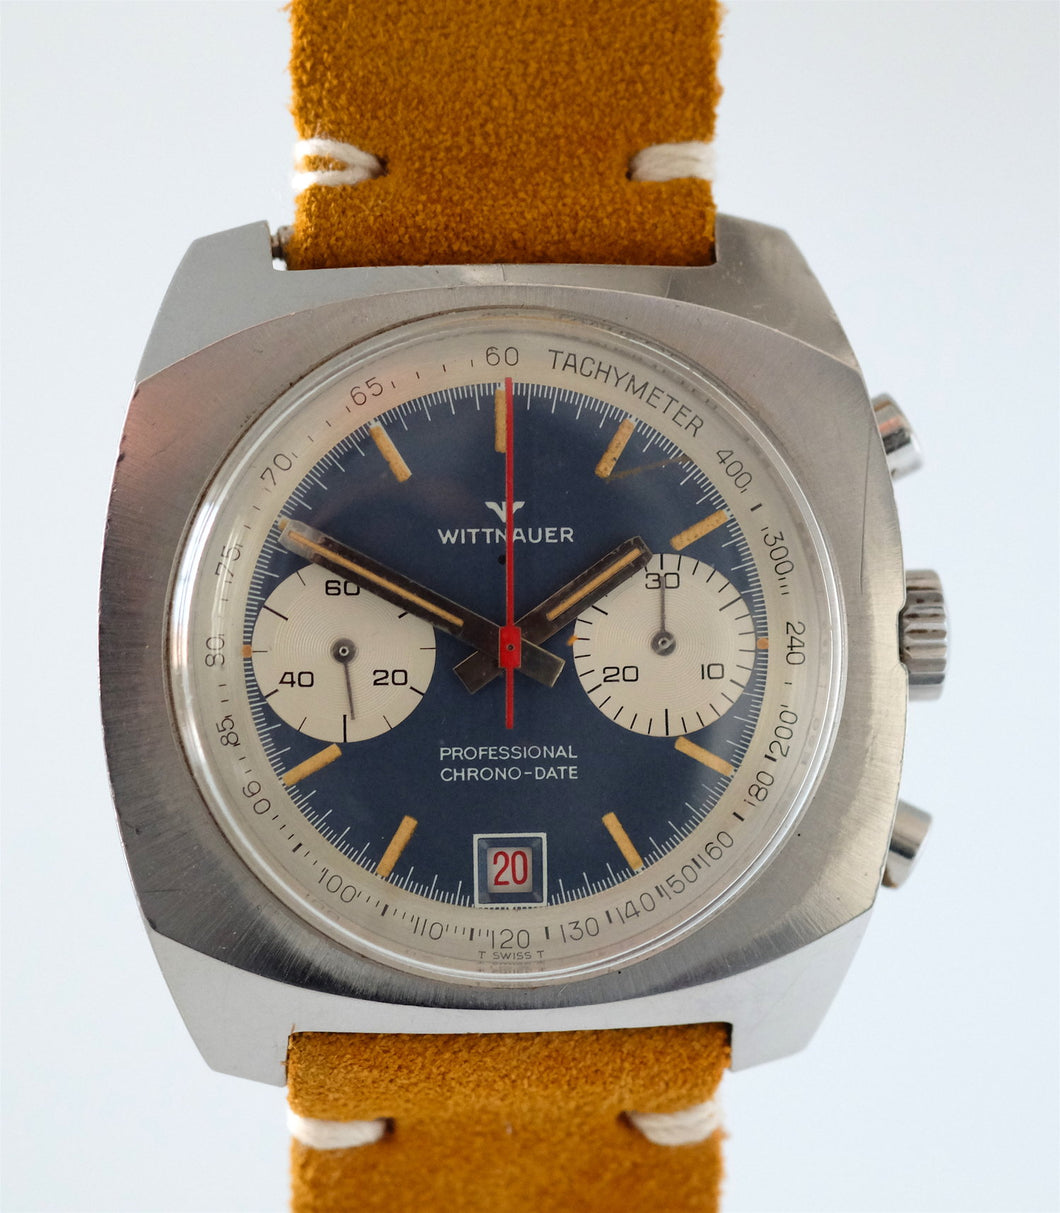 Wittnauer Professional Chrono-Date